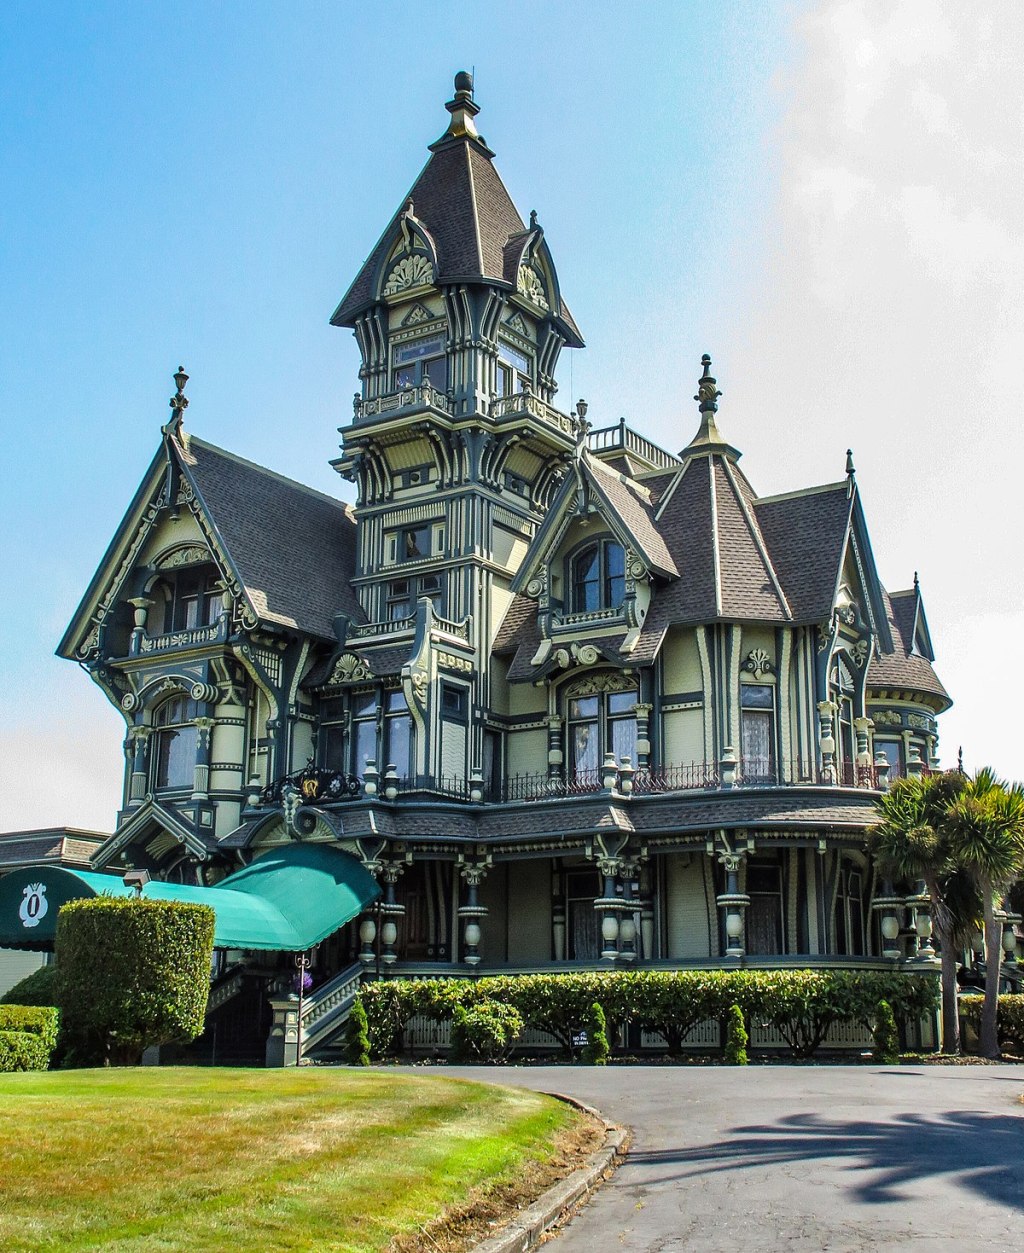 "Whimsical and Grand: The Timeless Allure of Queen Anne Architecture"